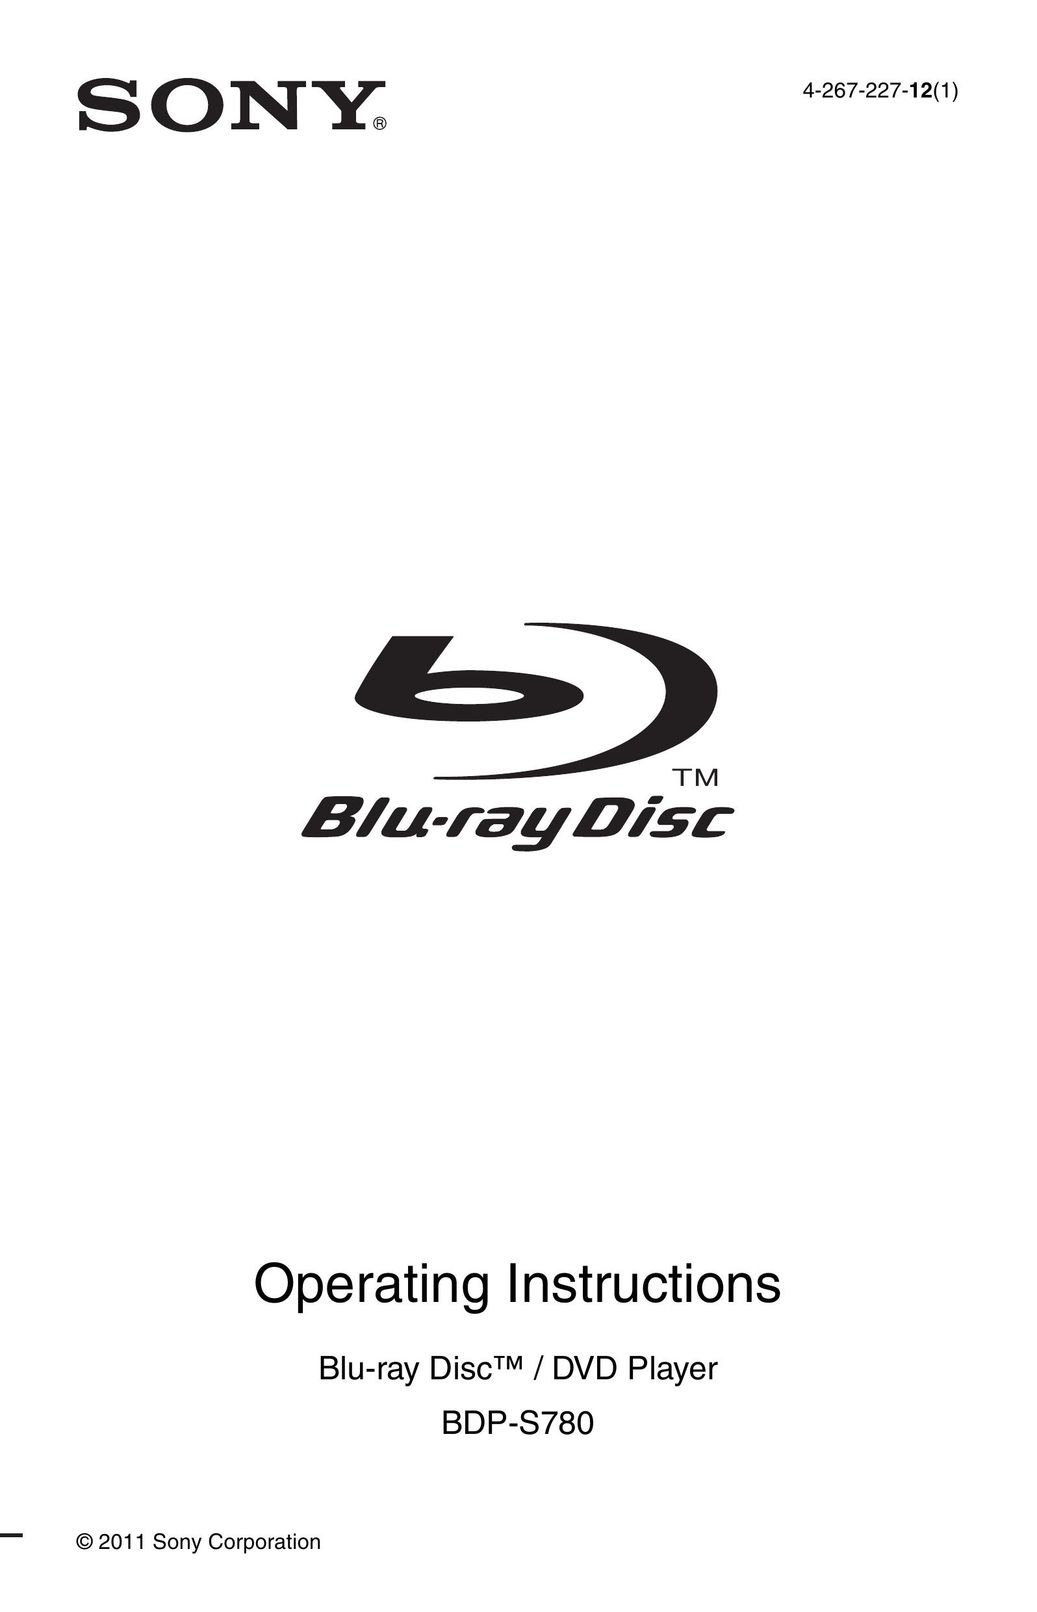 Sony BDP-S780 DVD Player User Manual